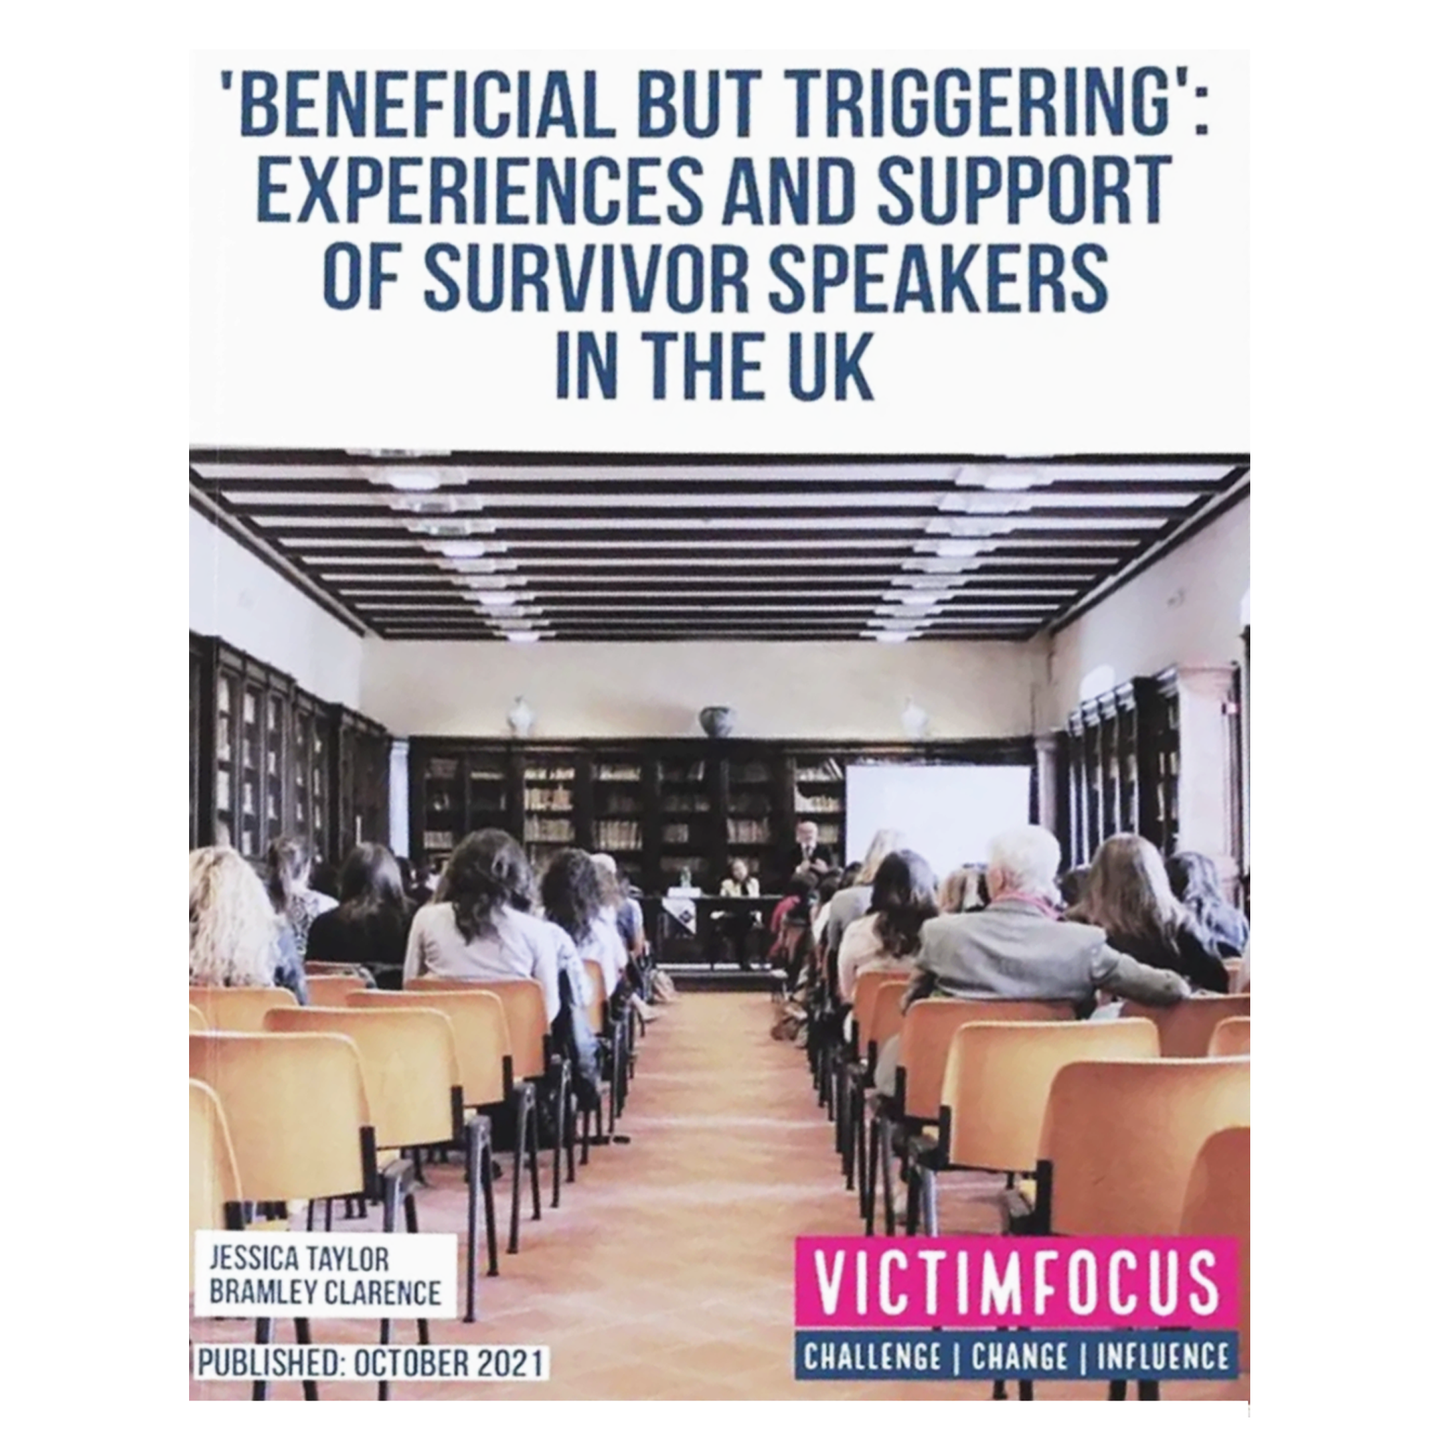 Study Report: 'Beneficial but triggering': Experiences and support of survivor speakers and experts by experience in the UK